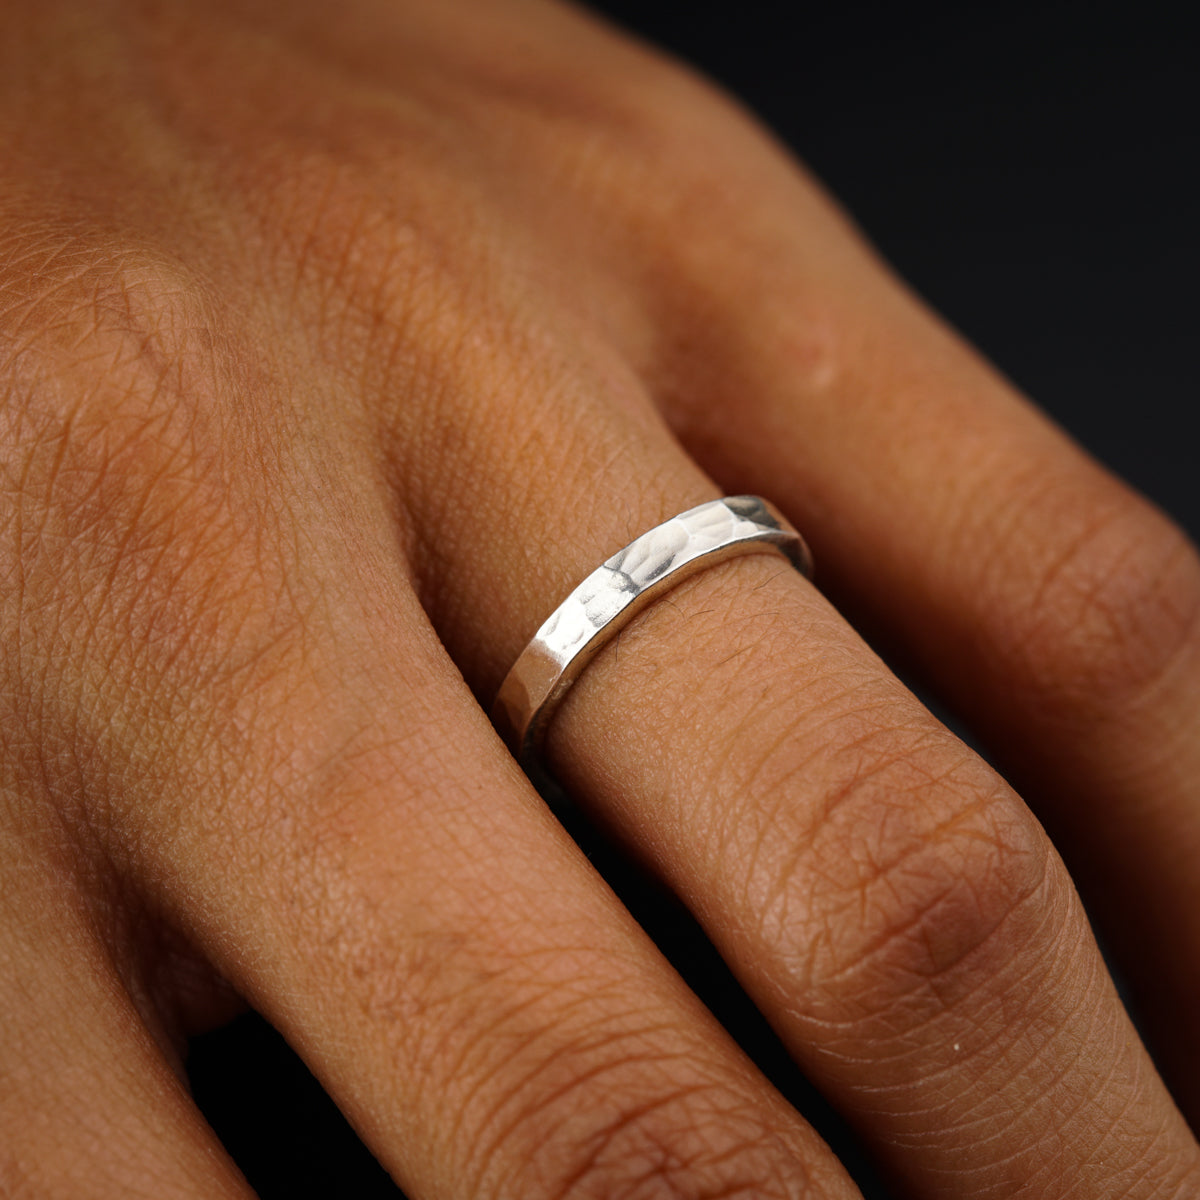 a person's hand with a wedding ring on it